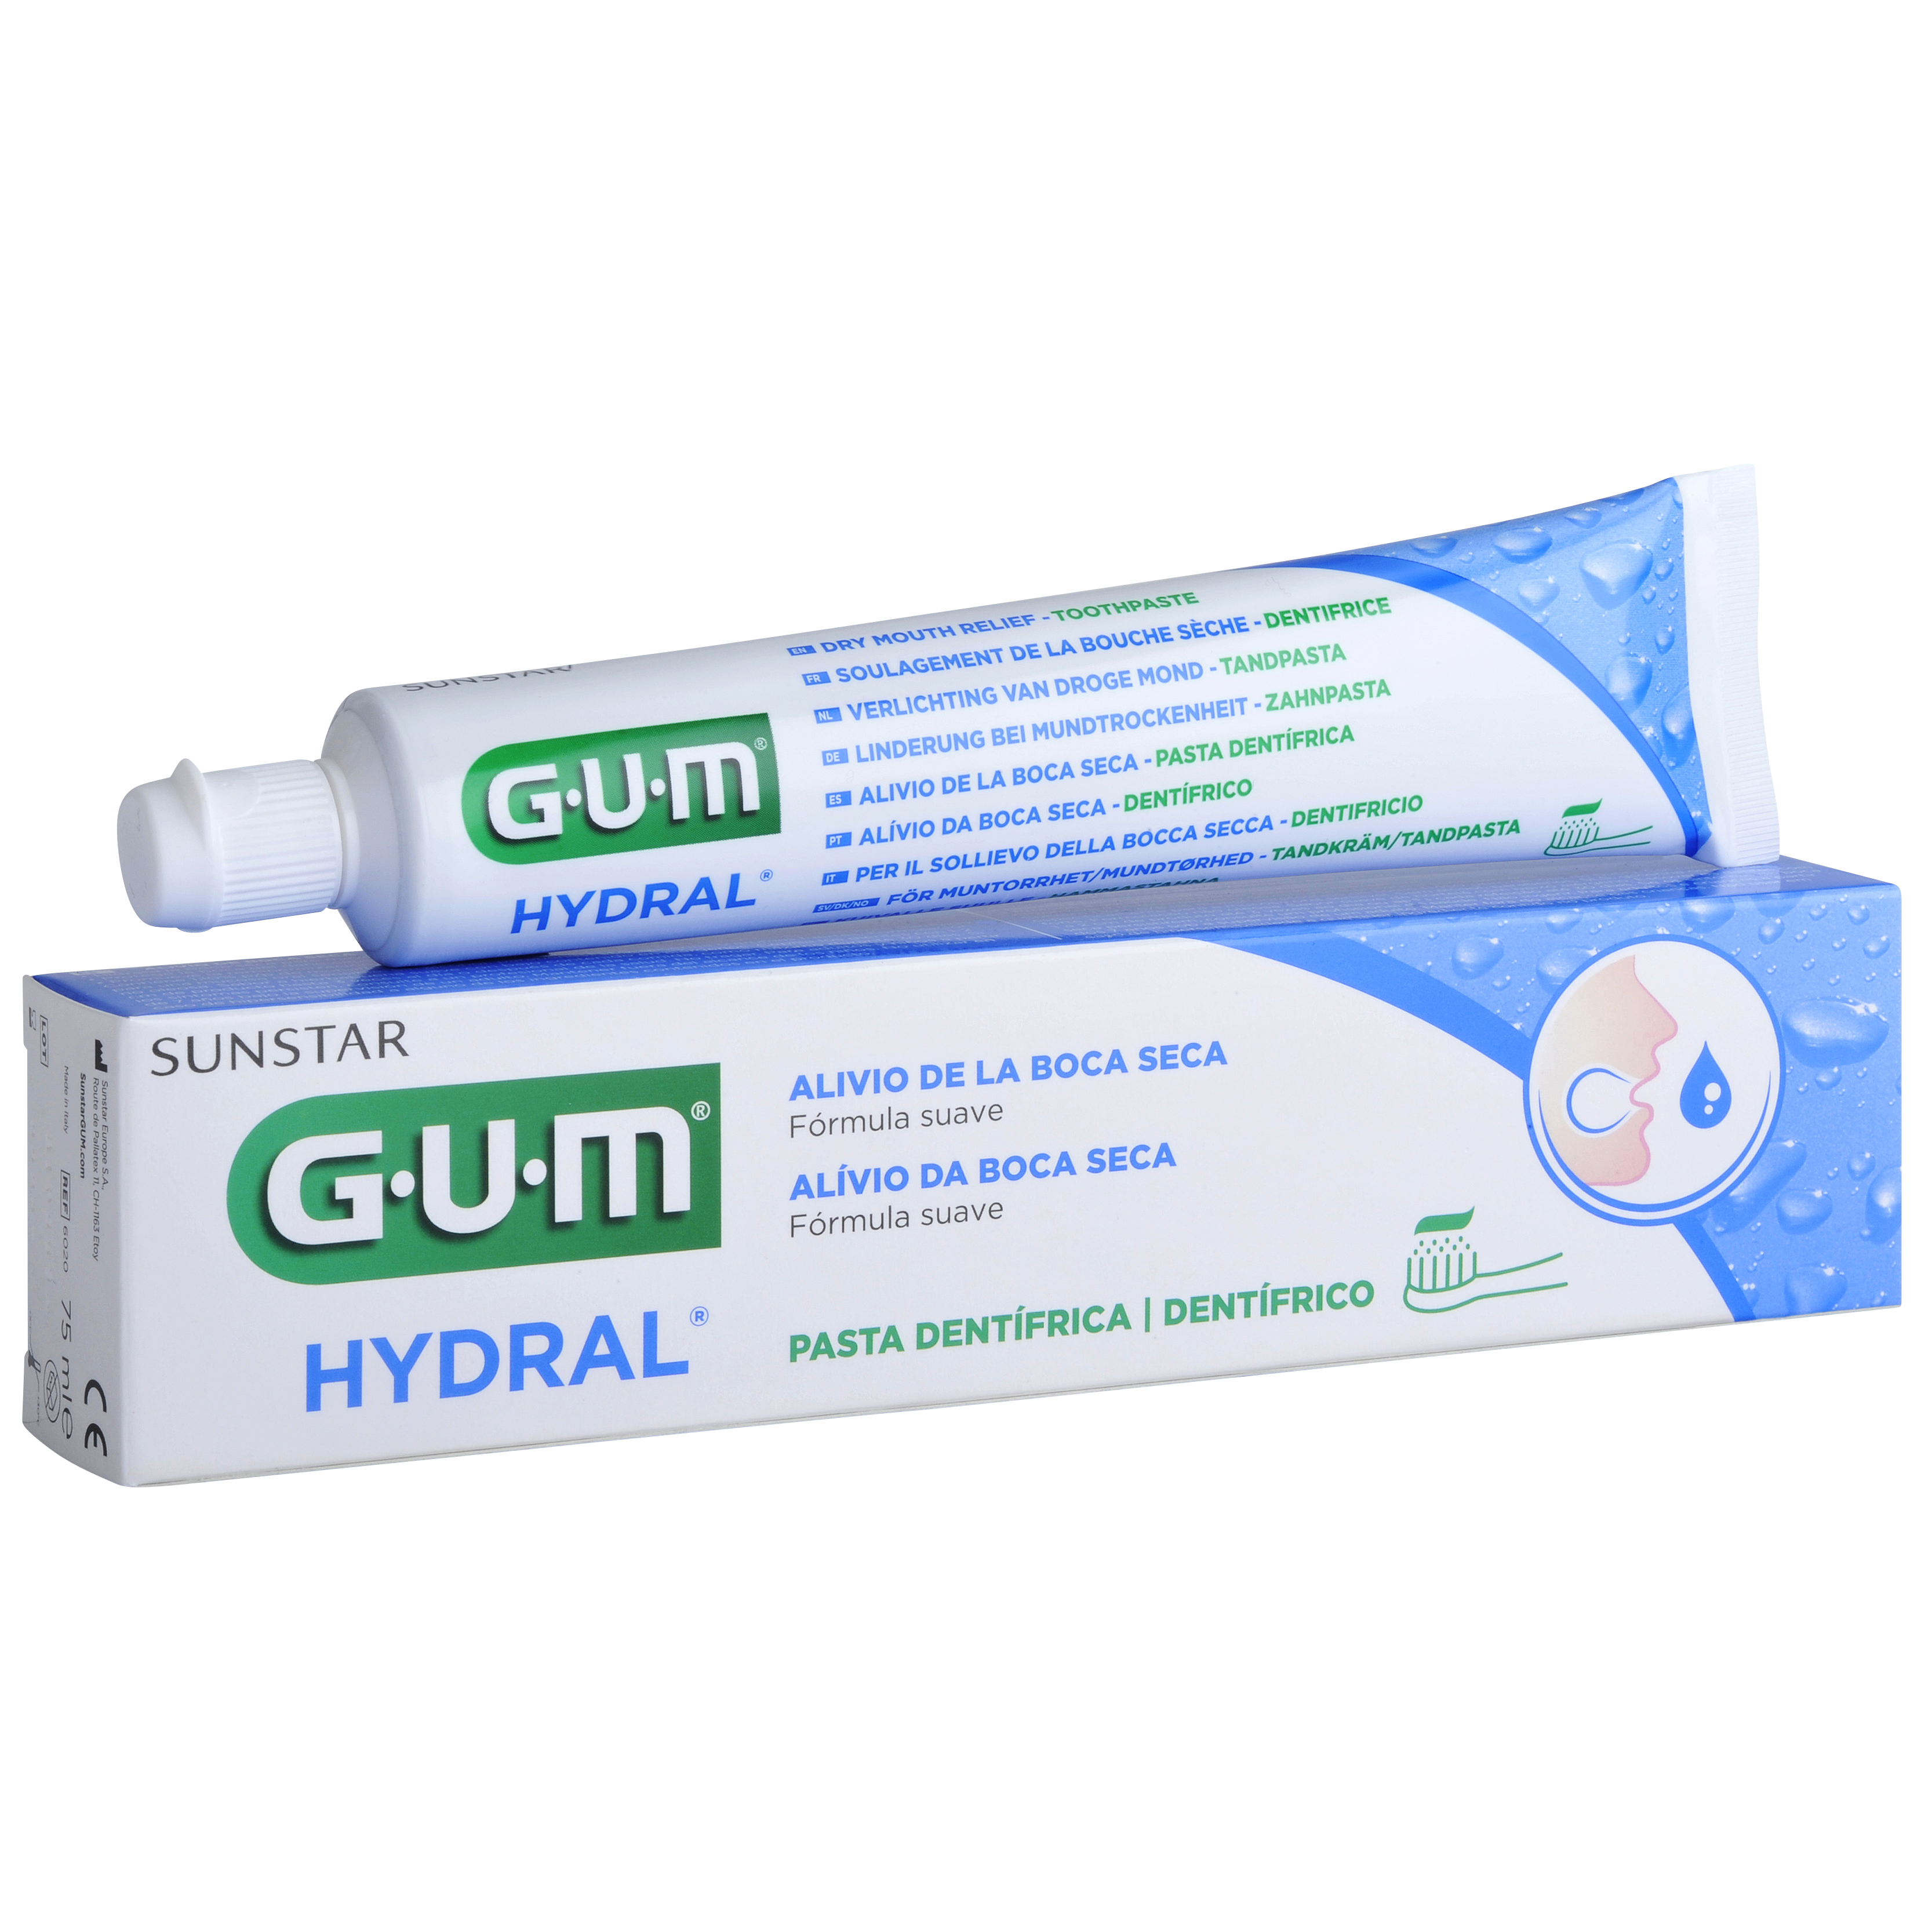 P6020-ES-PT-GUM-HYDRAL-Toothpaste-75ml-Box-Tube.png